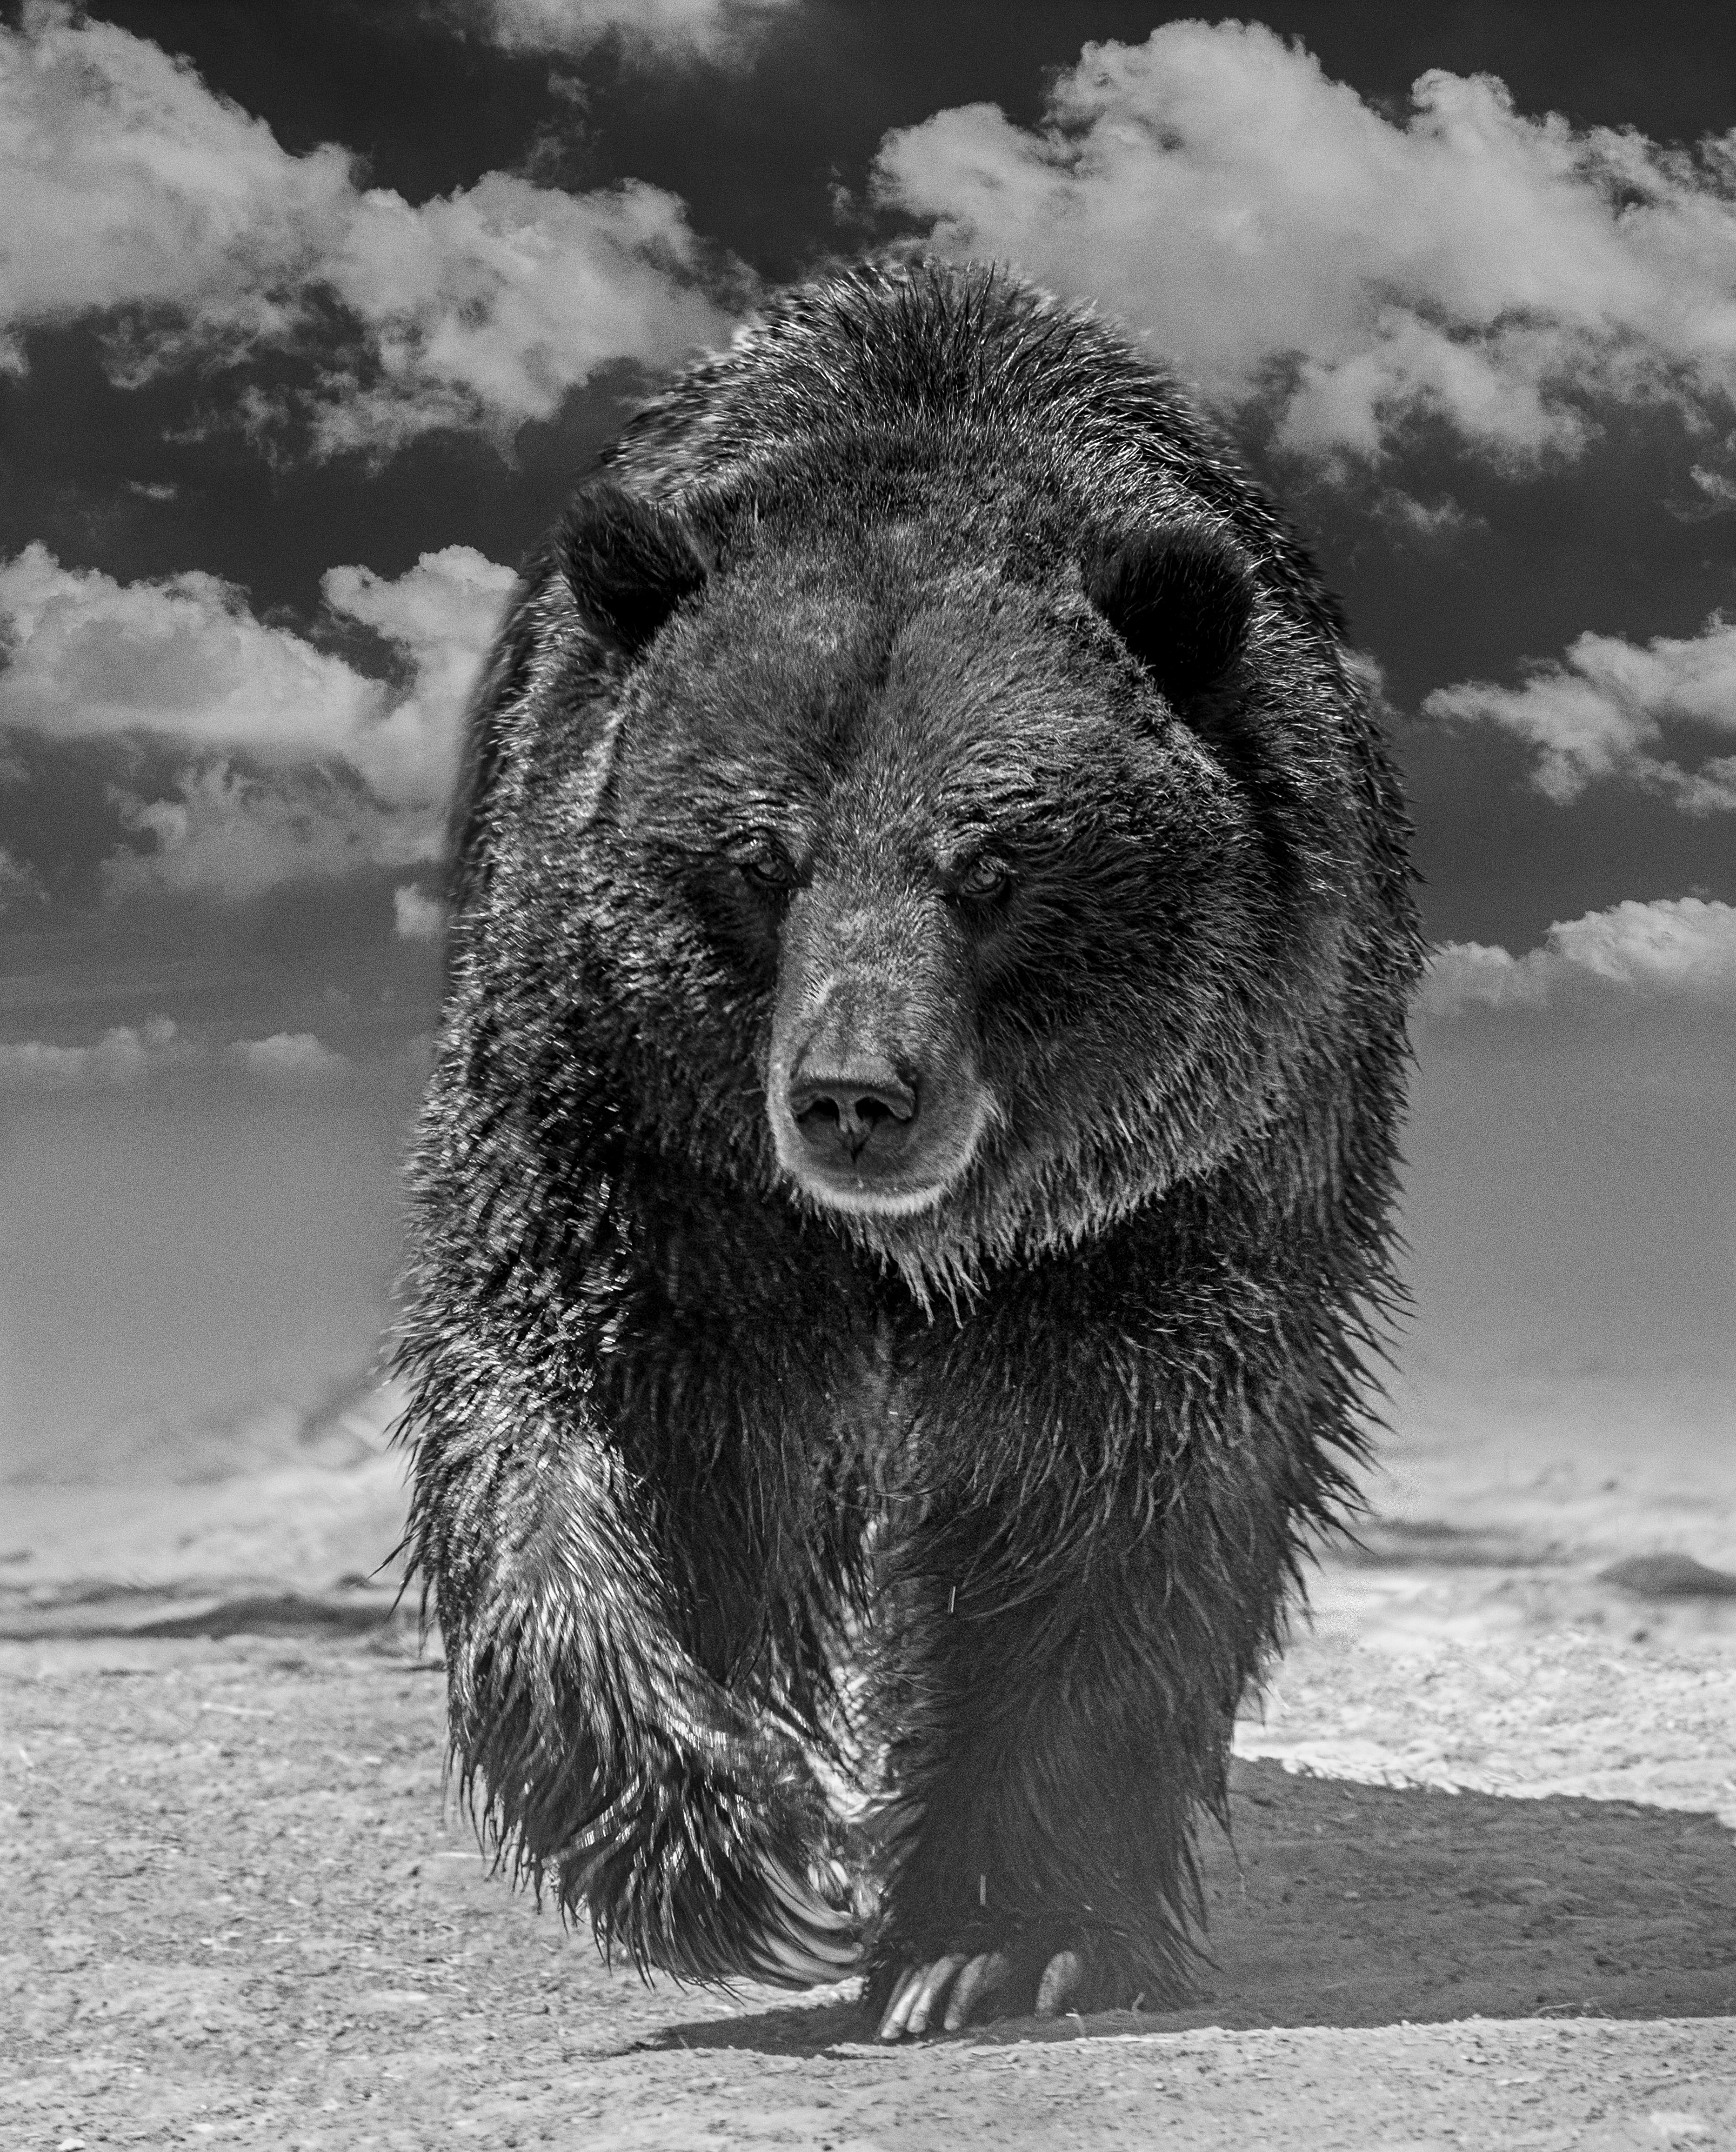 Shane Russeck Animal Print - "Grizzly Shores" 40 x 60 -Black and White Photography Unsigned Grizzly Bear 